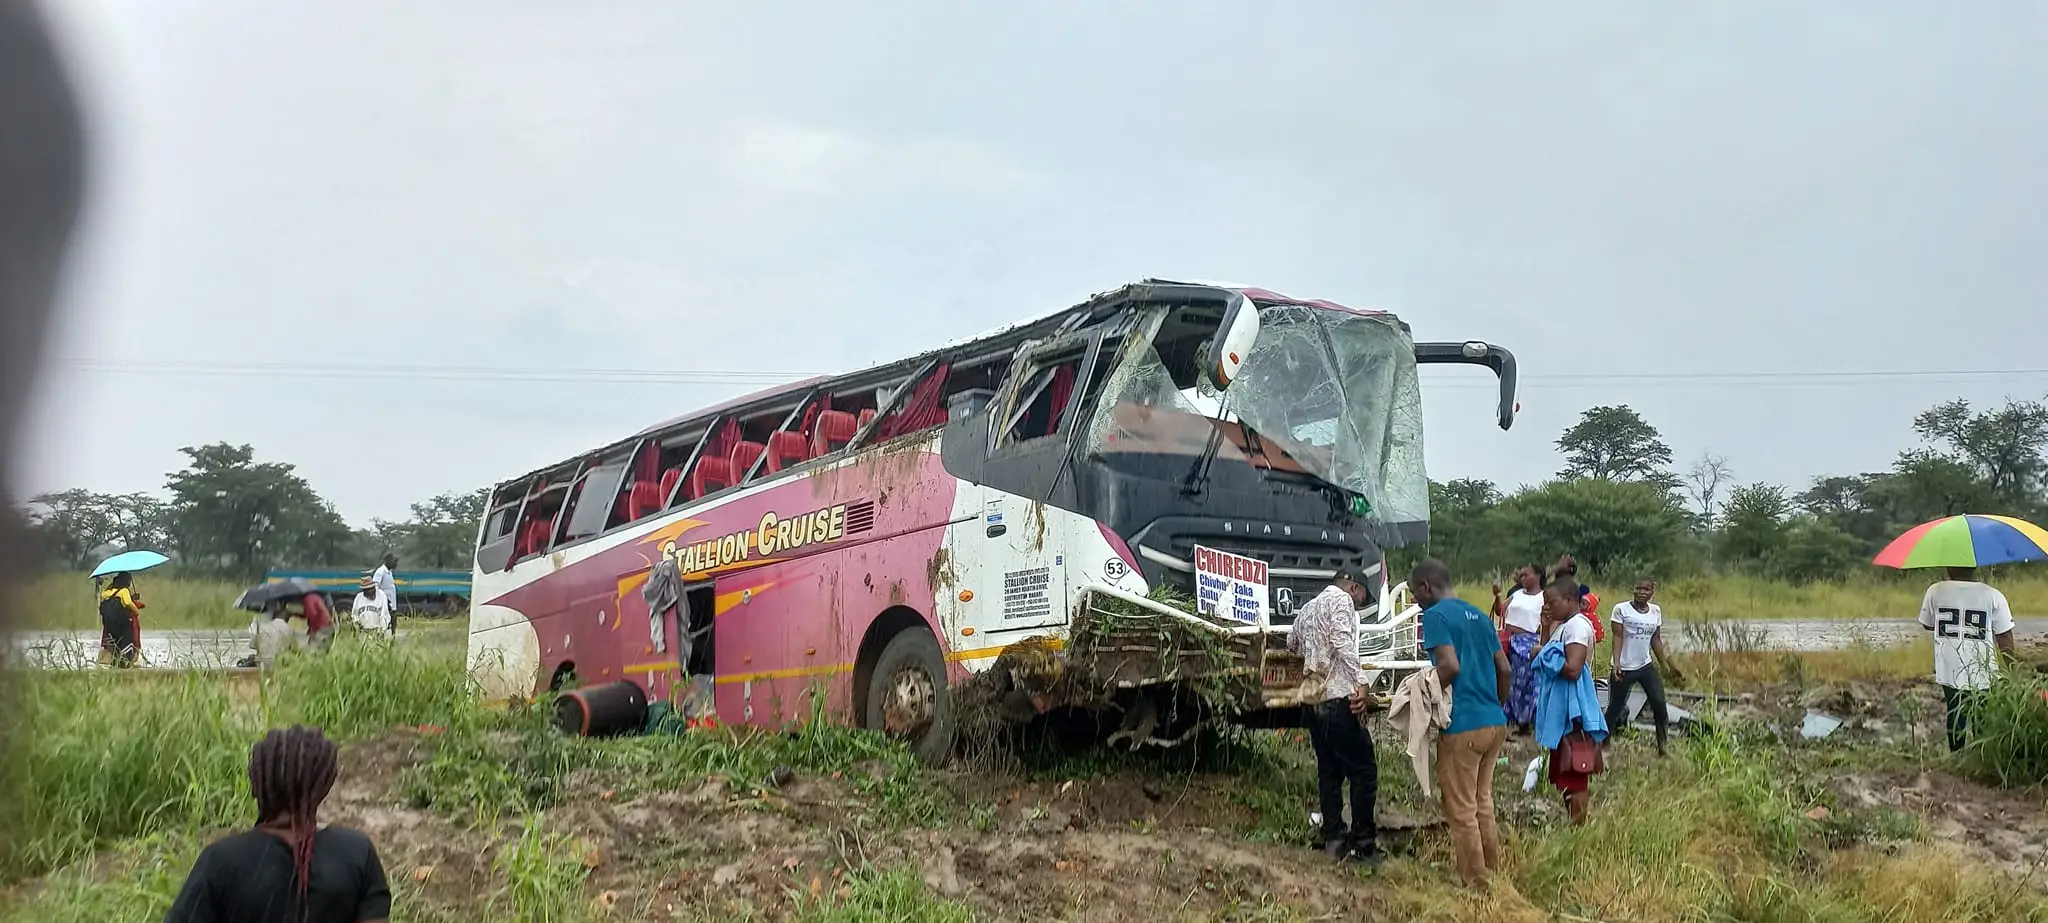 Stallion Cruise Bus In Fatal Accident {Pics}